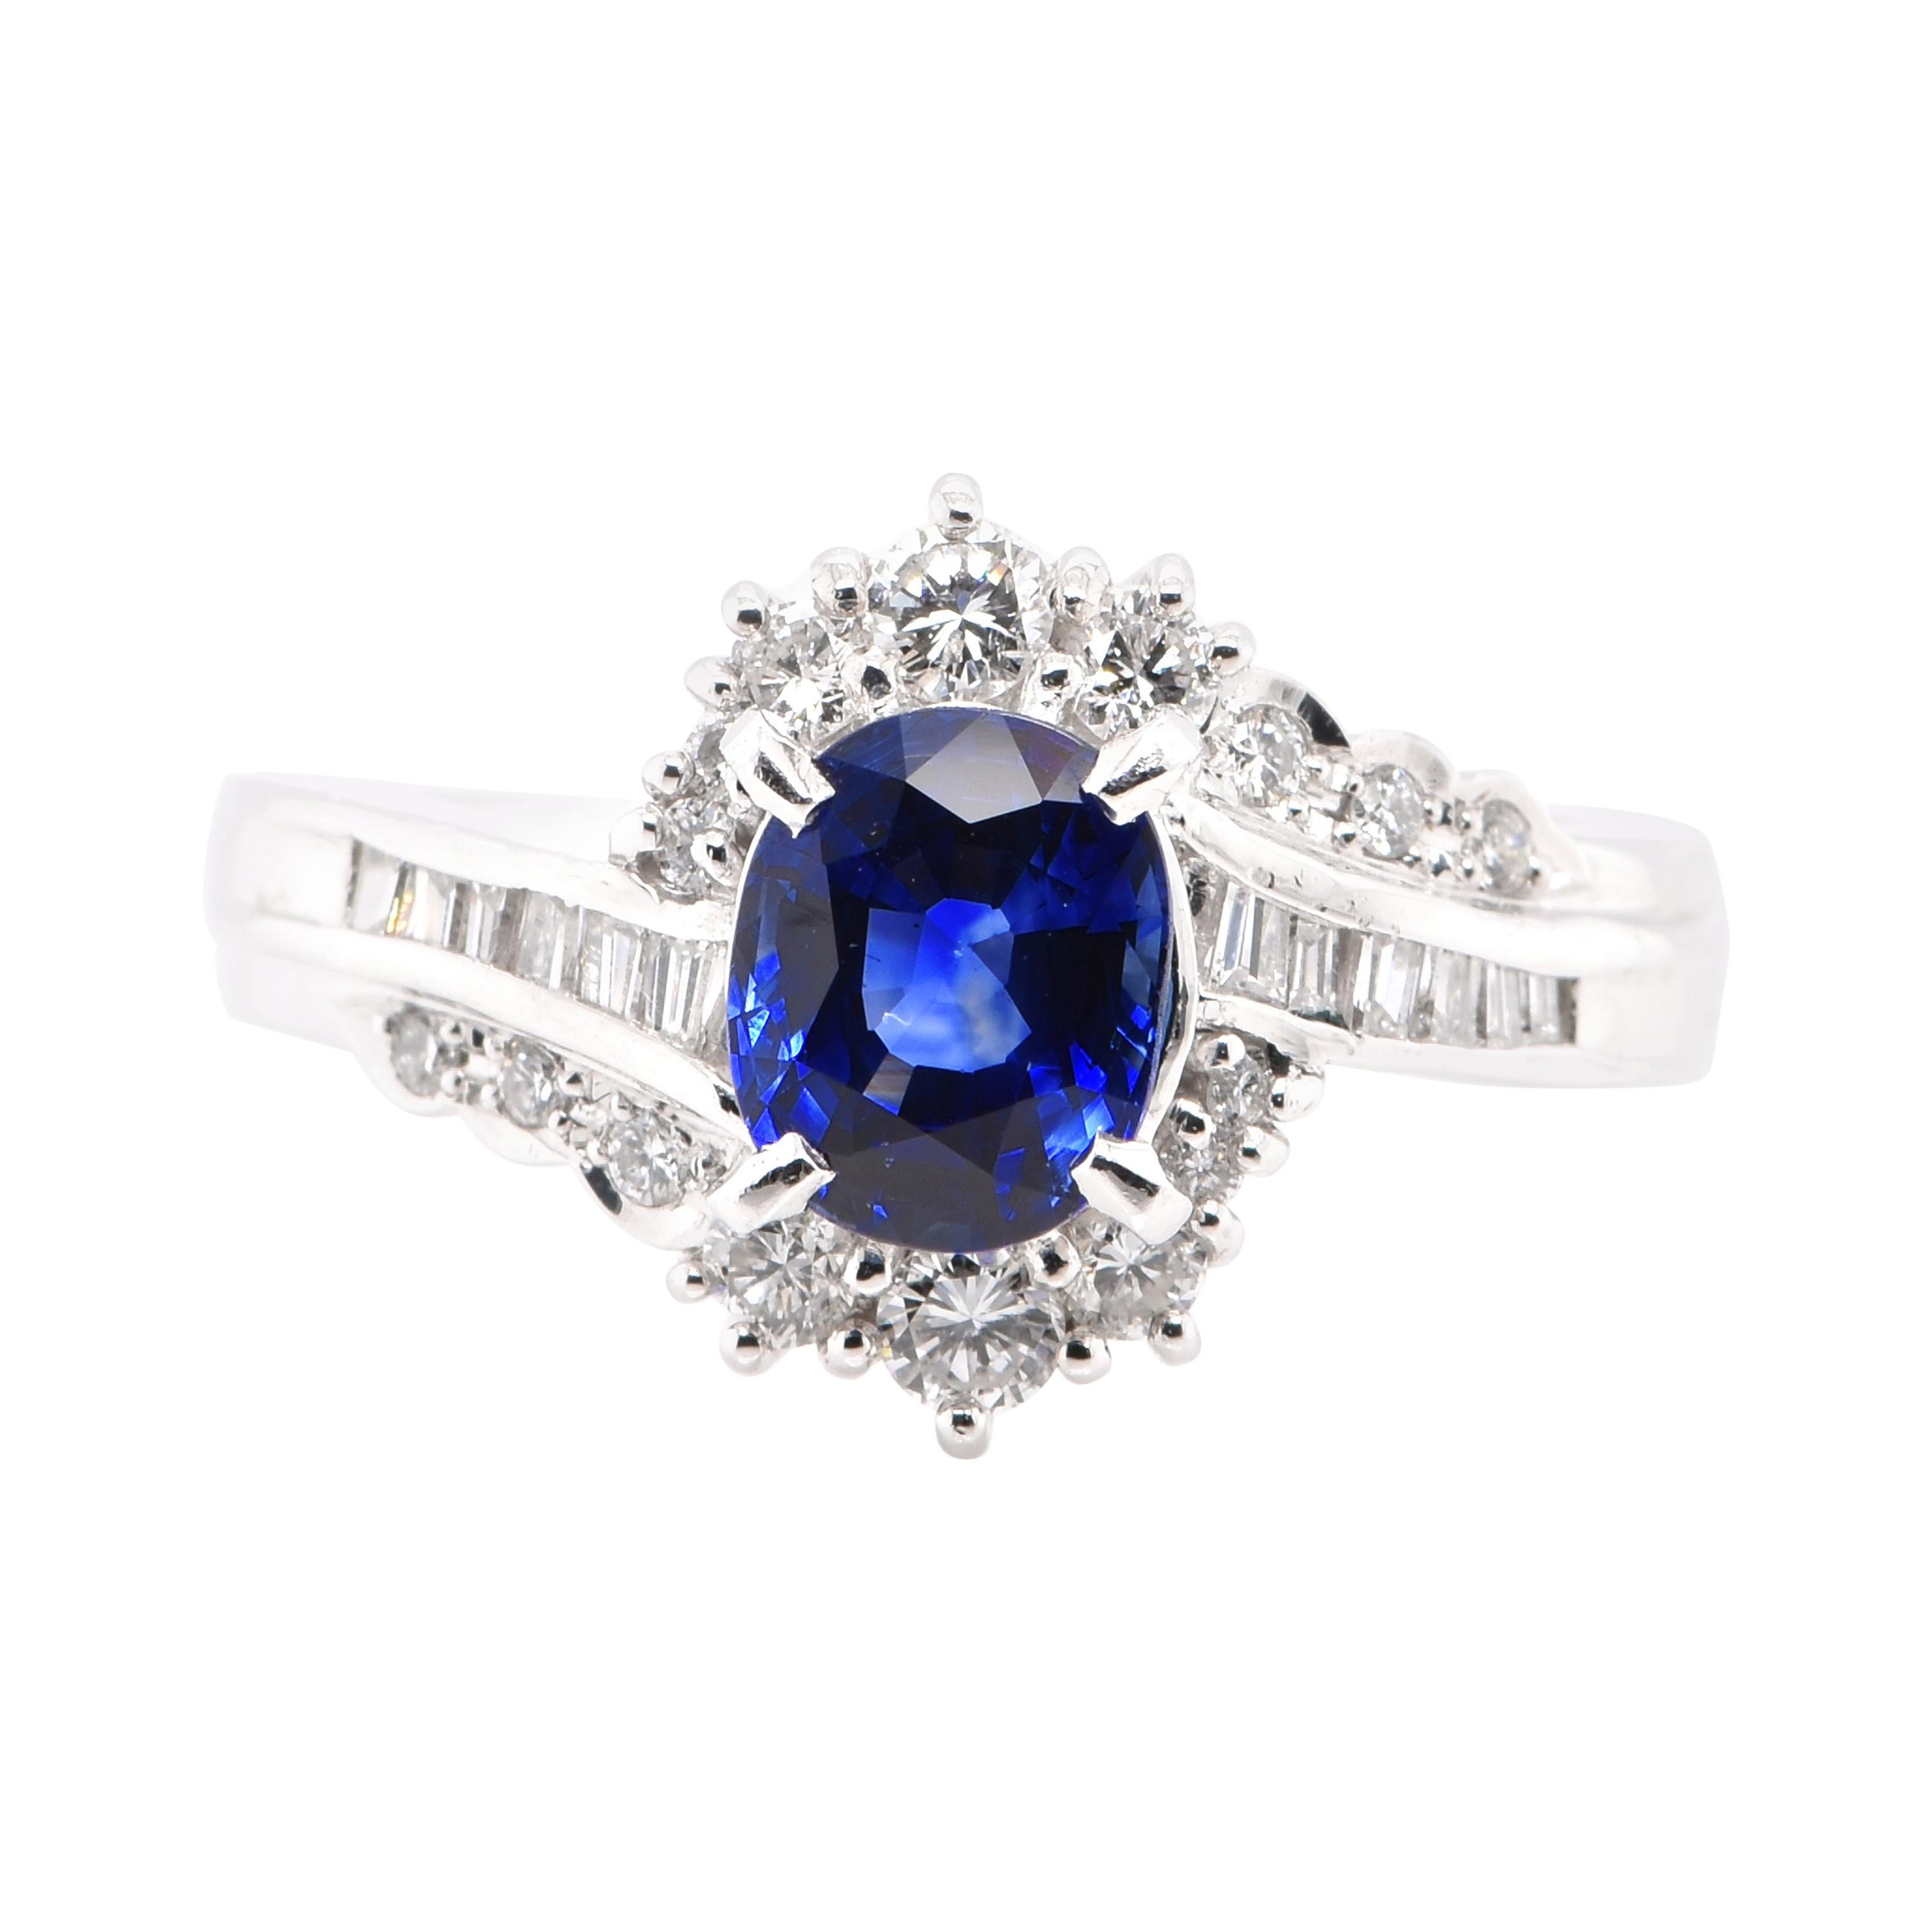 1.52 Carat Natural Royal Blue Sapphire and Diamond Ring Set in Platinum For Sale